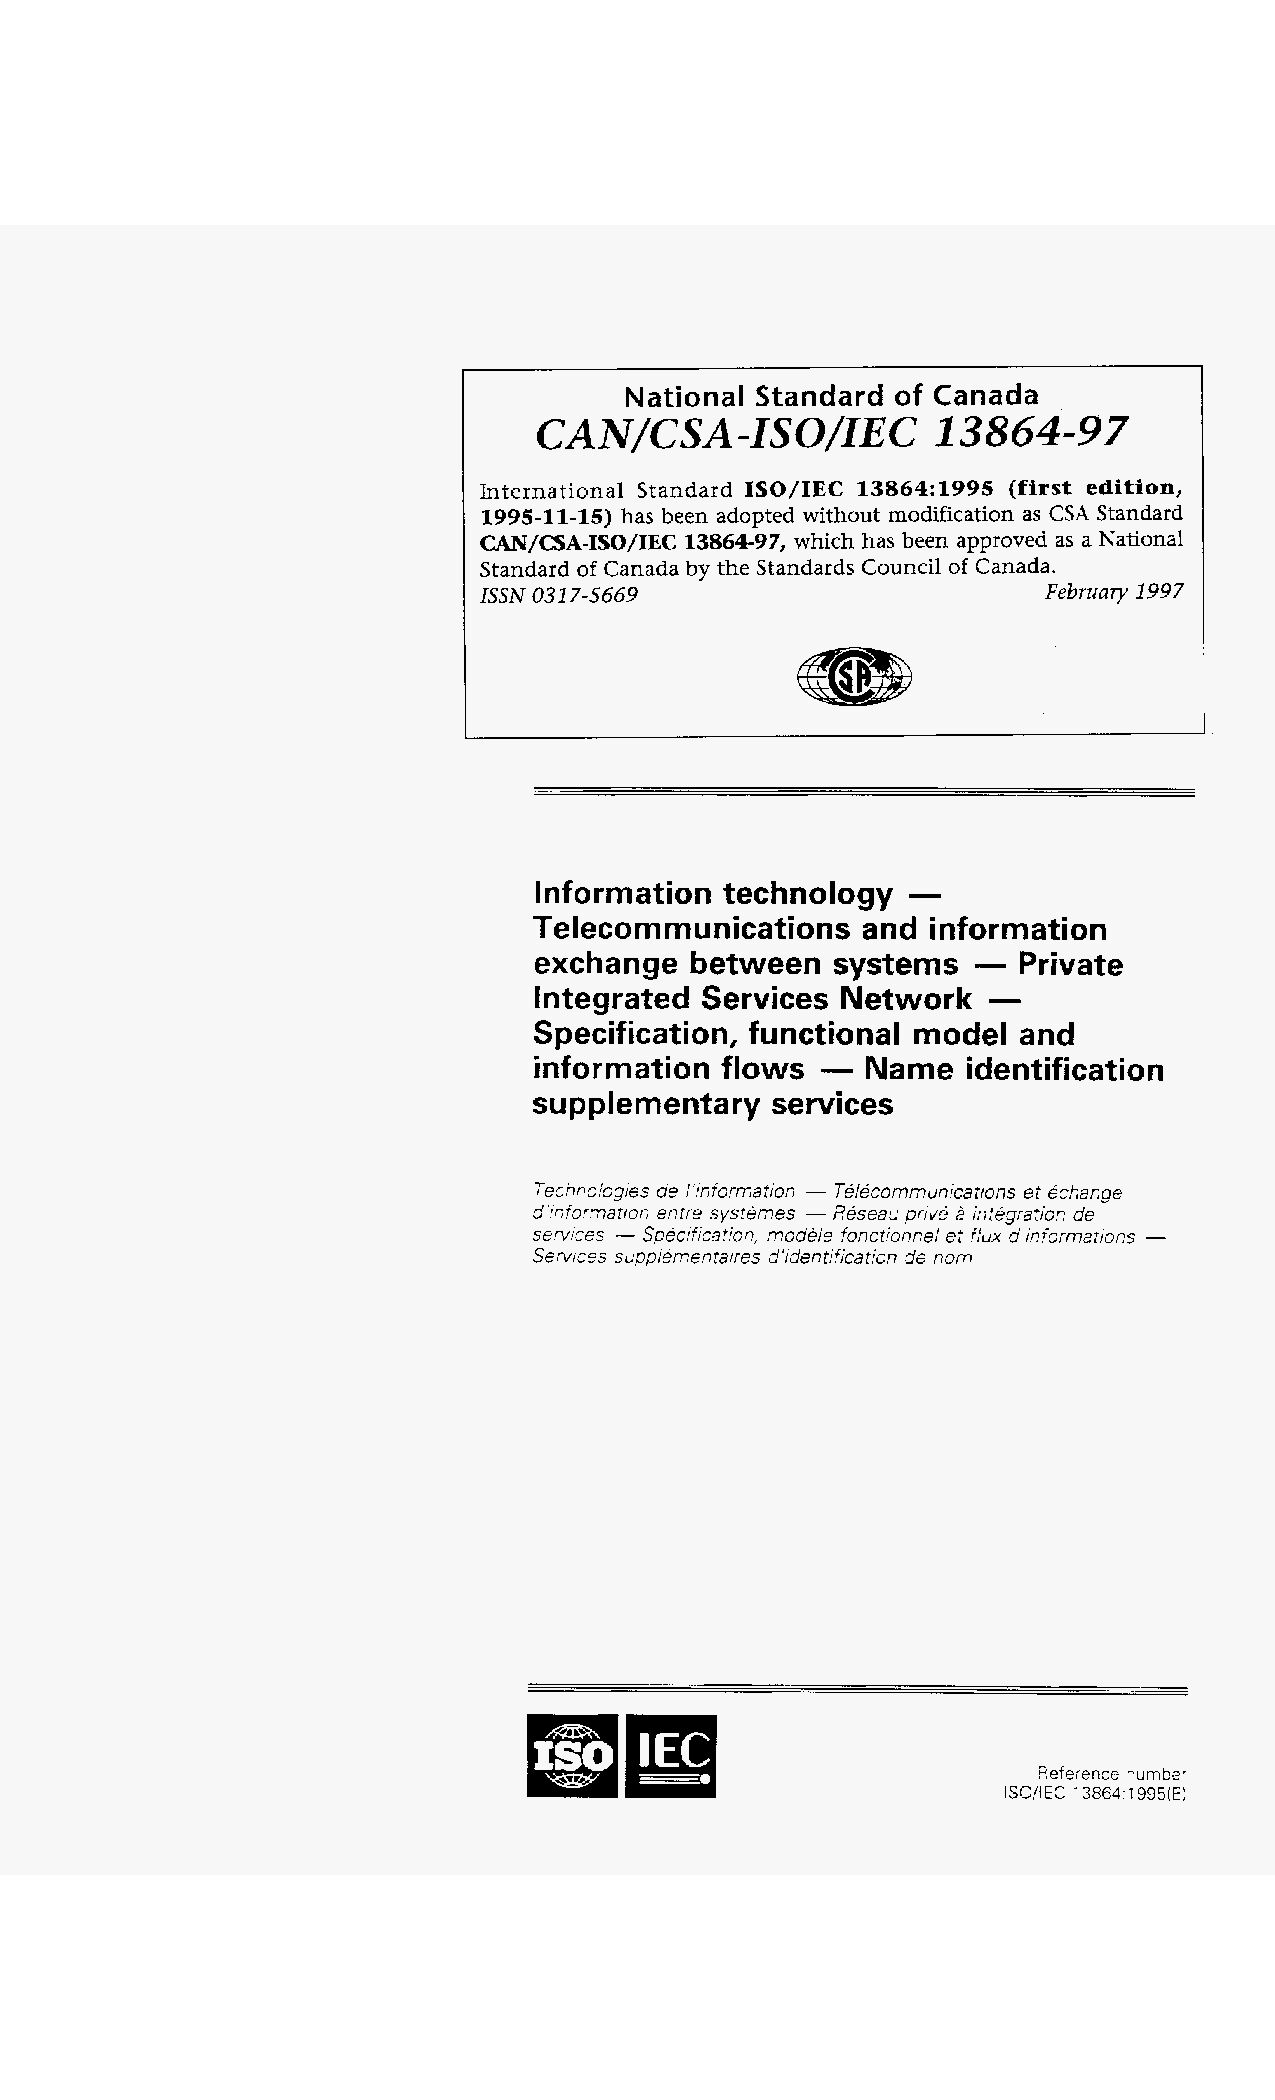 CAN/CSA-ISO/IEC 13864:1997